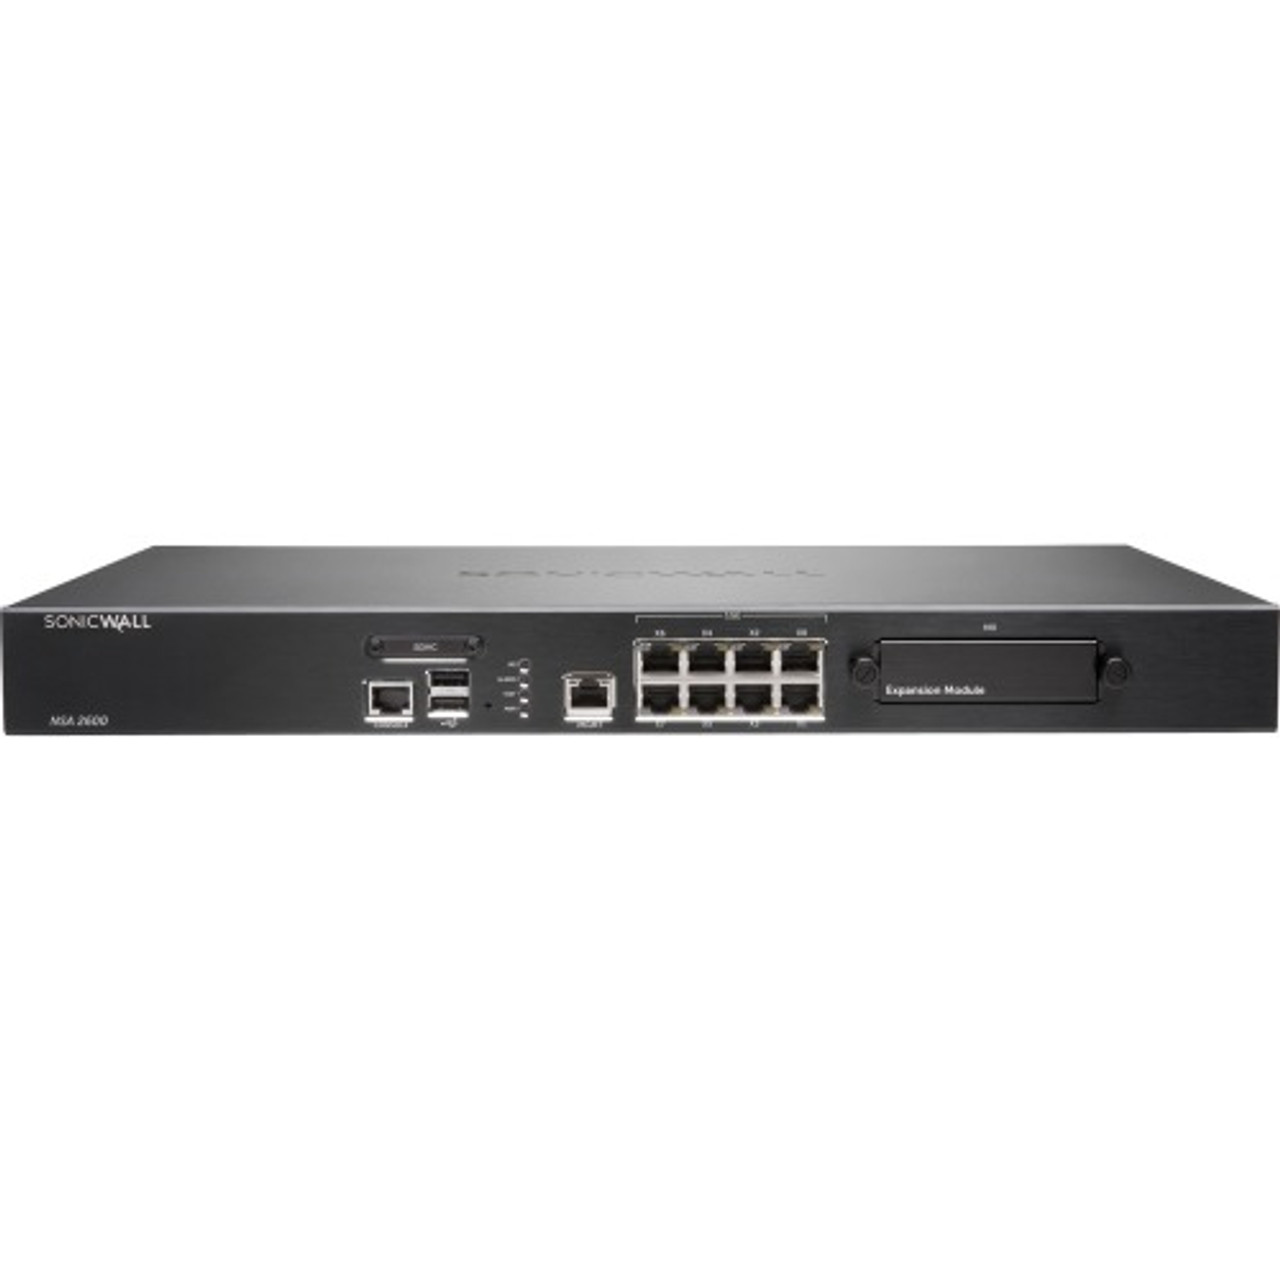 01-SSC-3863 SonicWALL NSA 2600 TotalSecure Security Appliance (Refurbished)